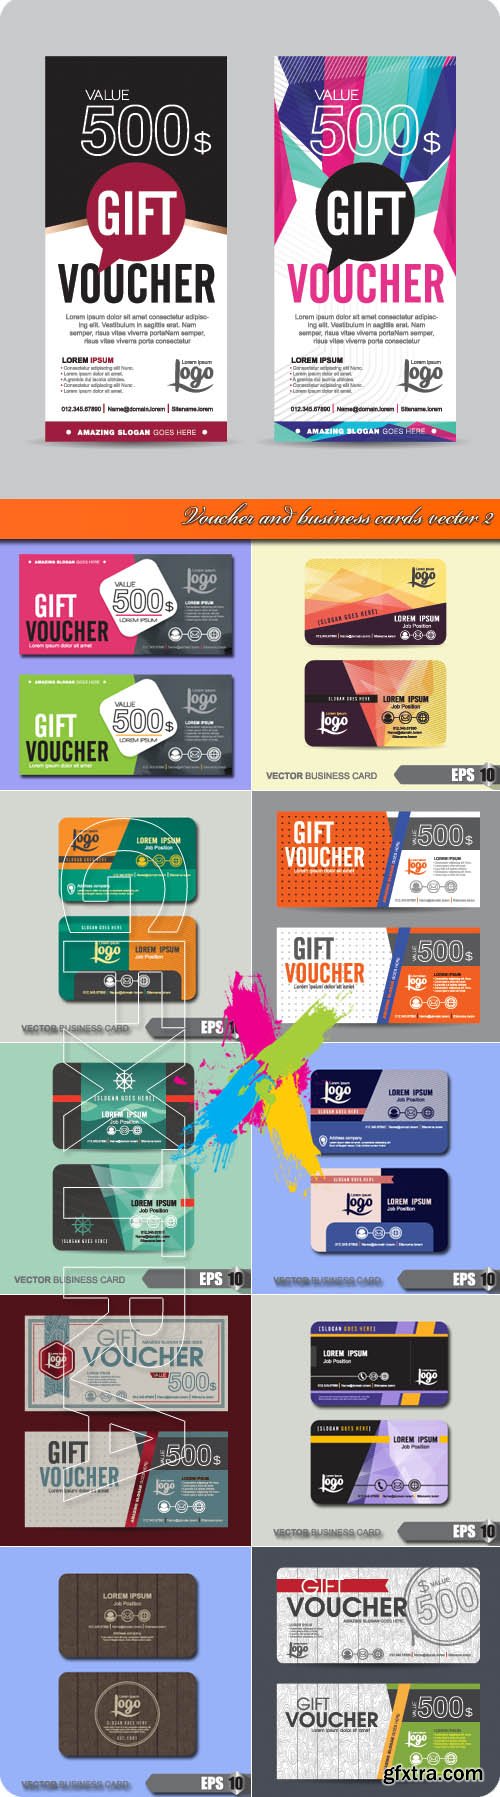 Voucher and business cards vector 2